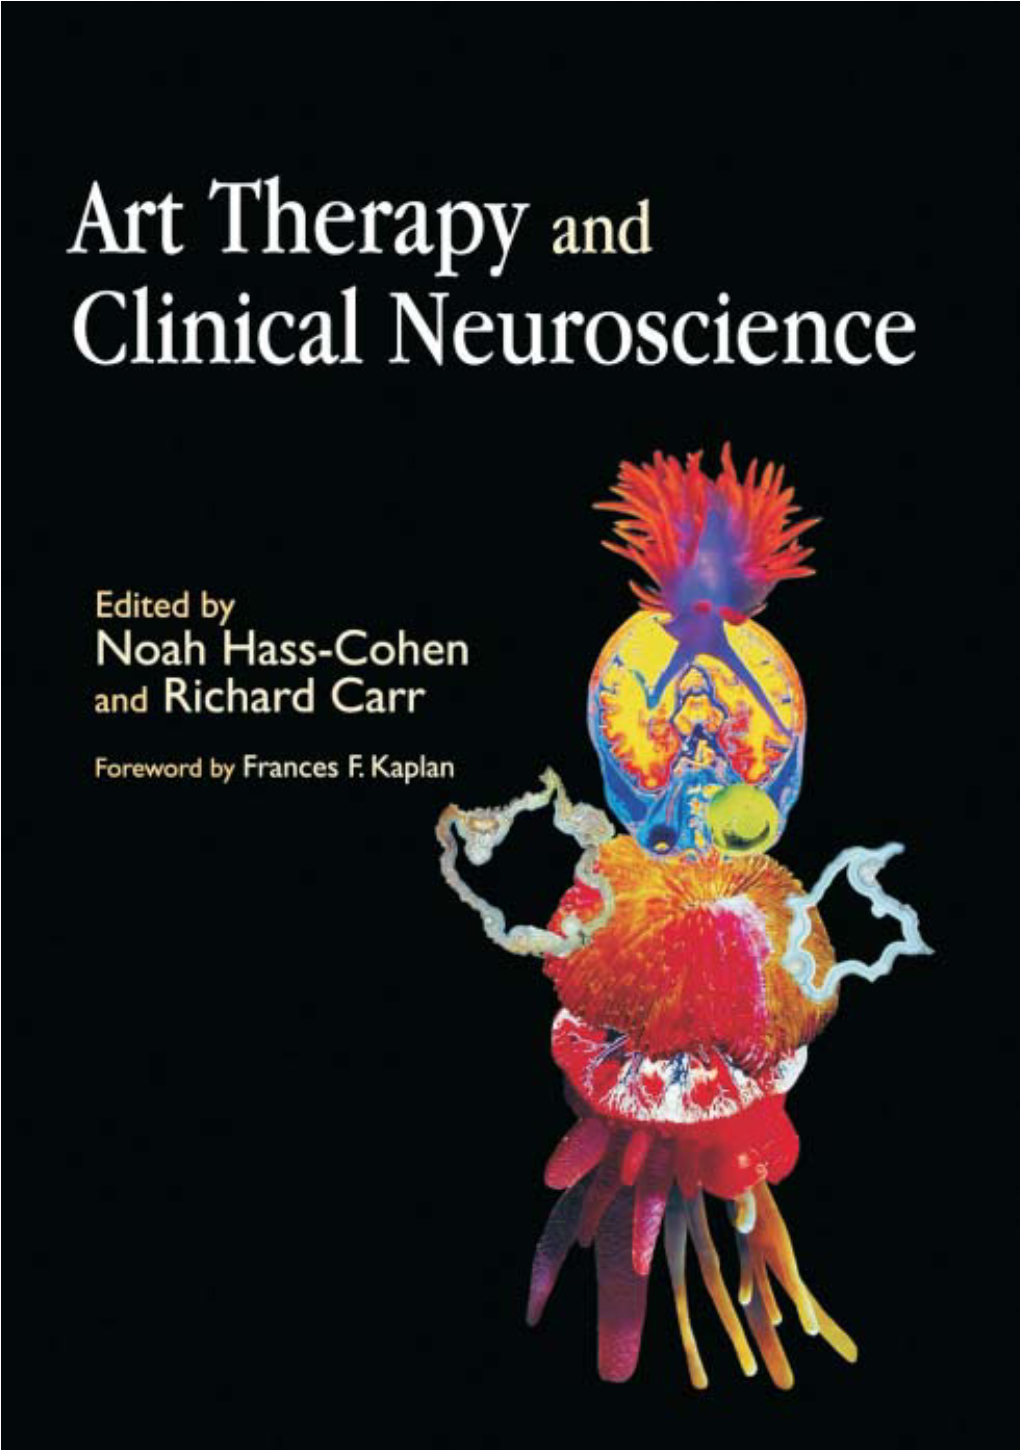 Art Therapy and Clinical Neuroscience